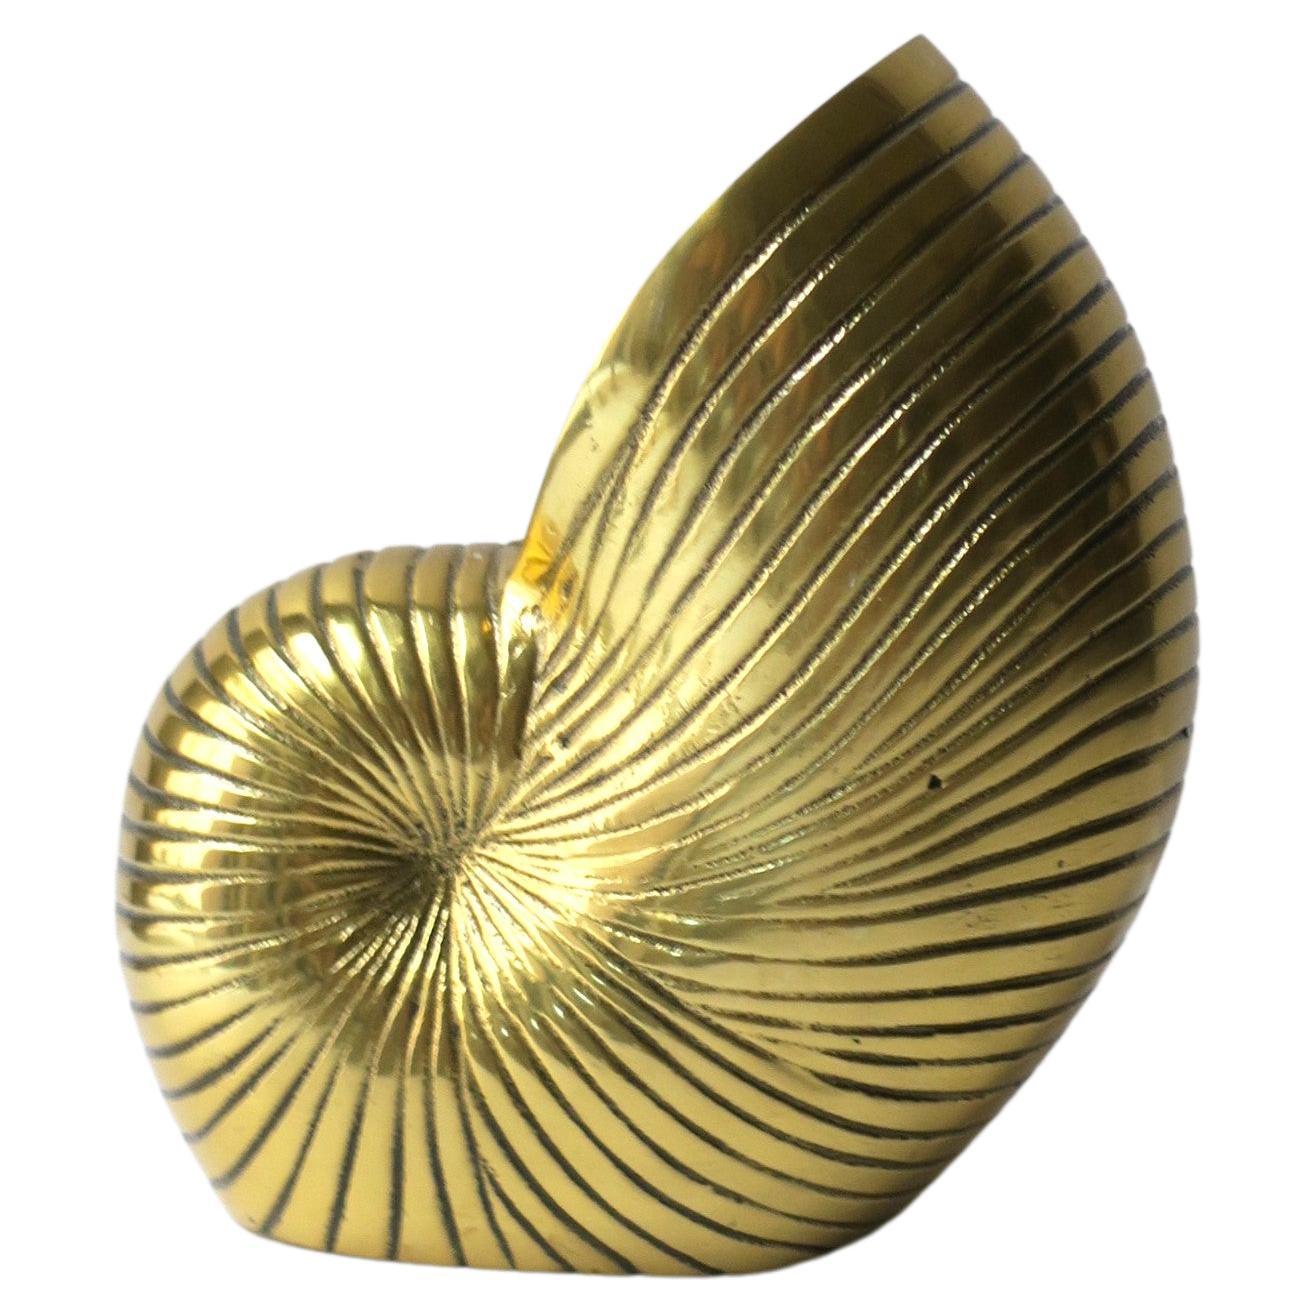 Brass Nautilus Seashell Vase, Planter, or Decorative Object For Sale